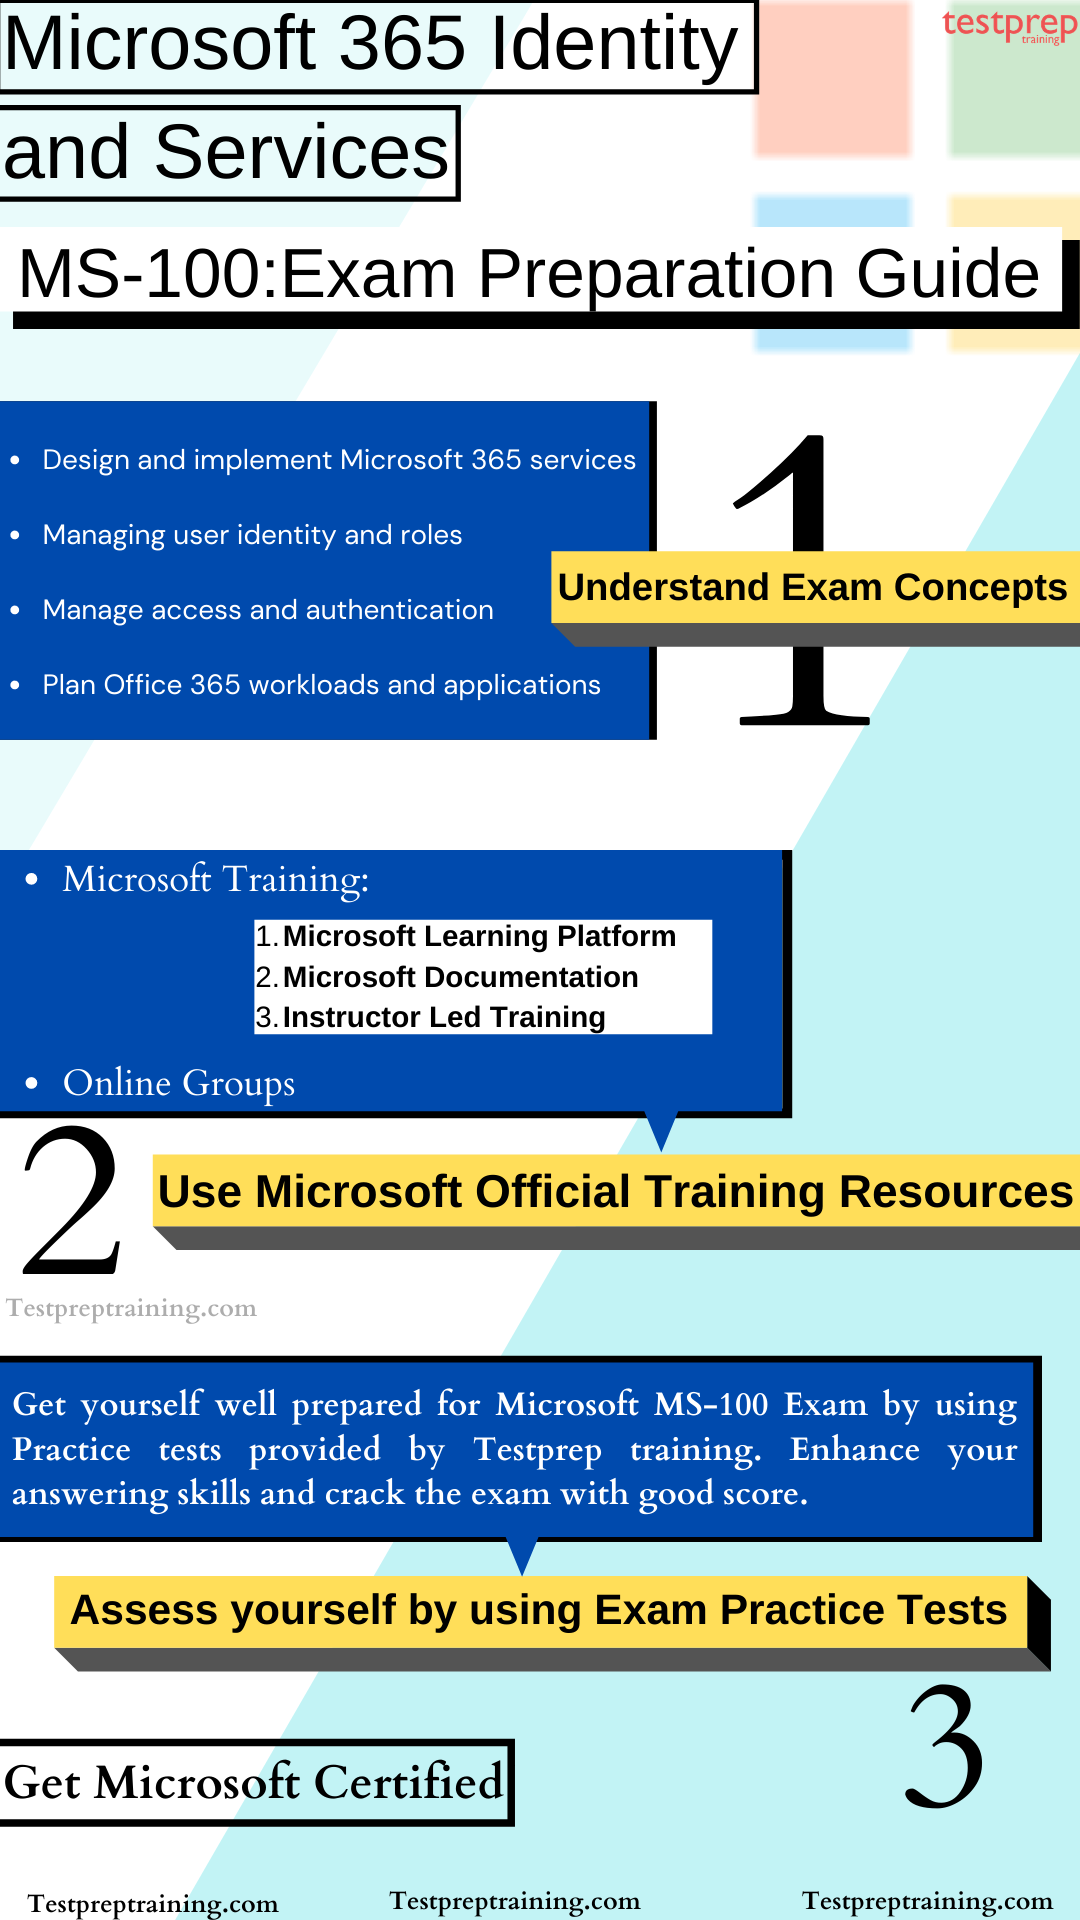  Microsoft 365 Identity and Services (MS-100) Exam study guide